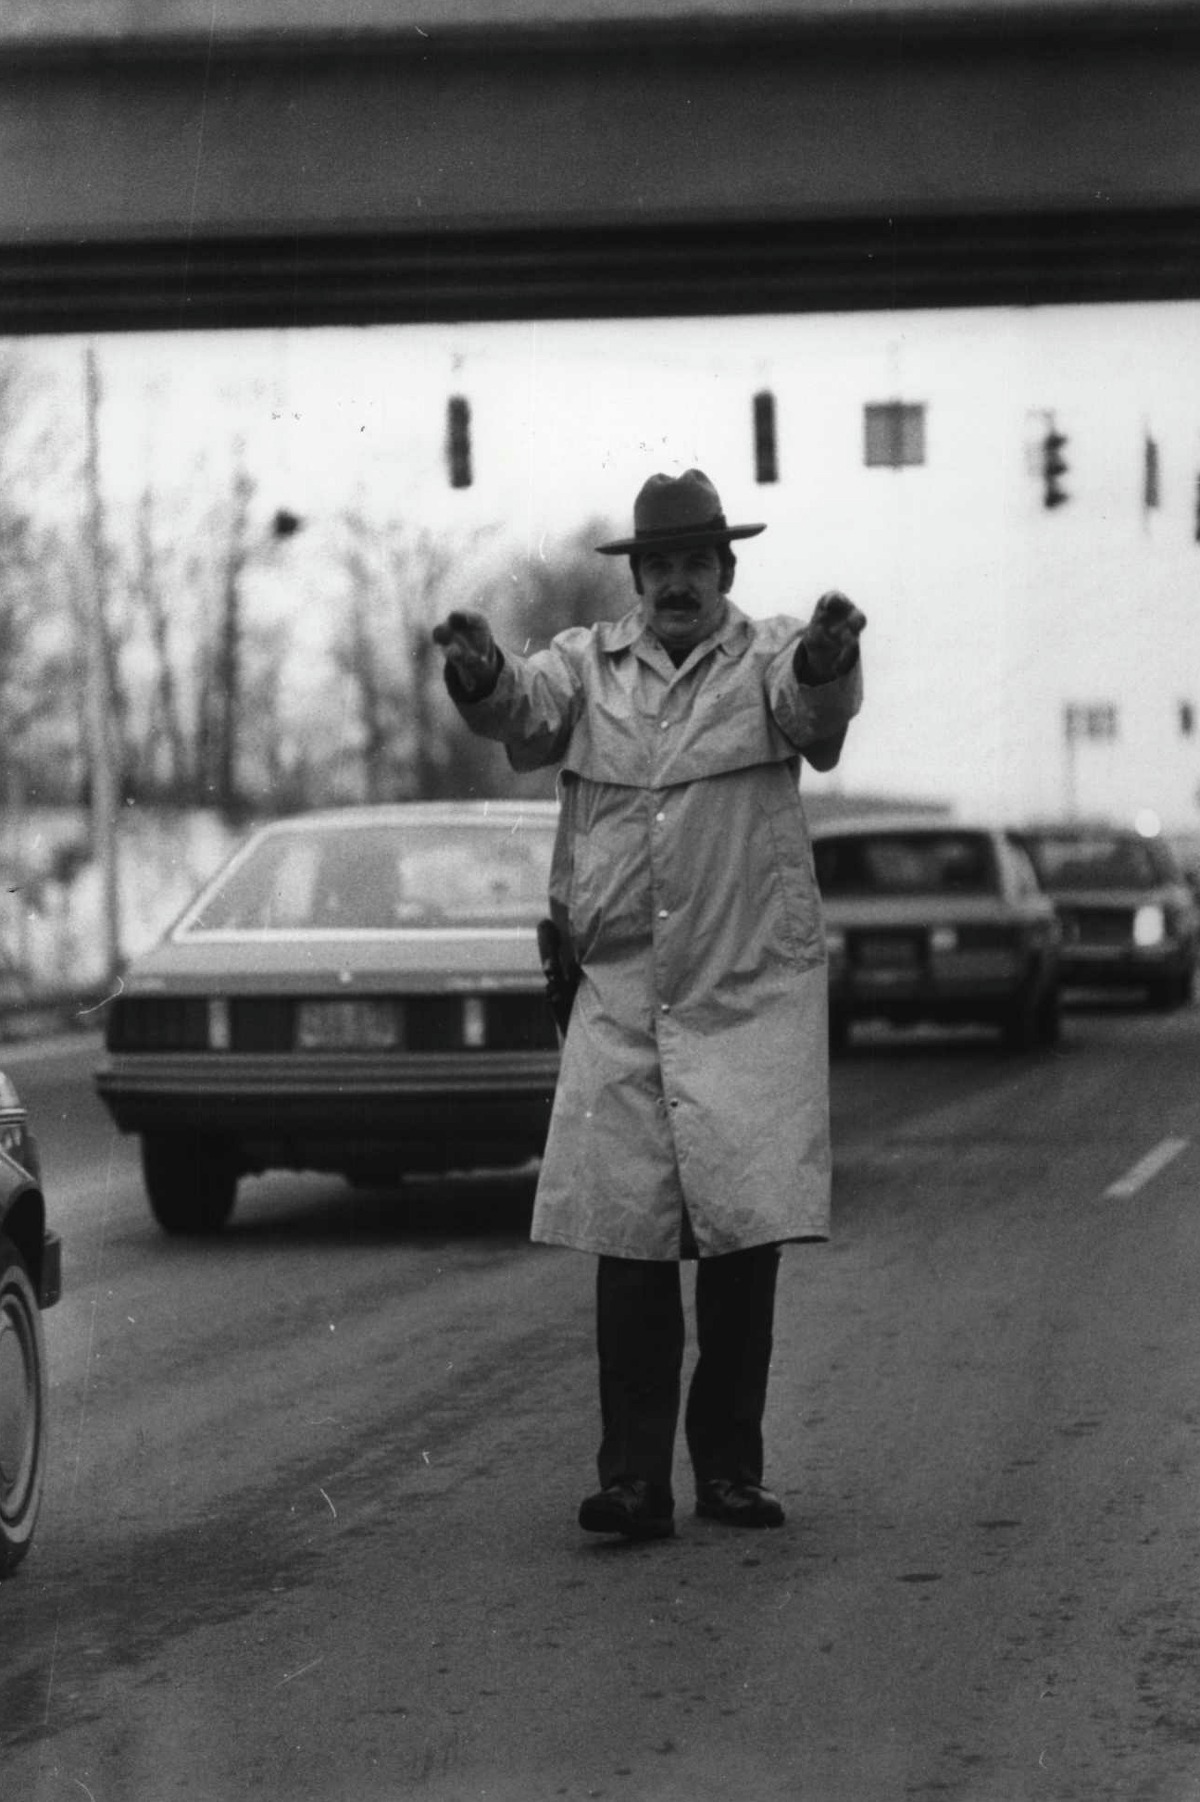 Guilderland, New York police officer directs Route 20 traffic - Western Avenue instersection with Northway. January 27, 1984 (Jack Madigan/Times Union Archive)